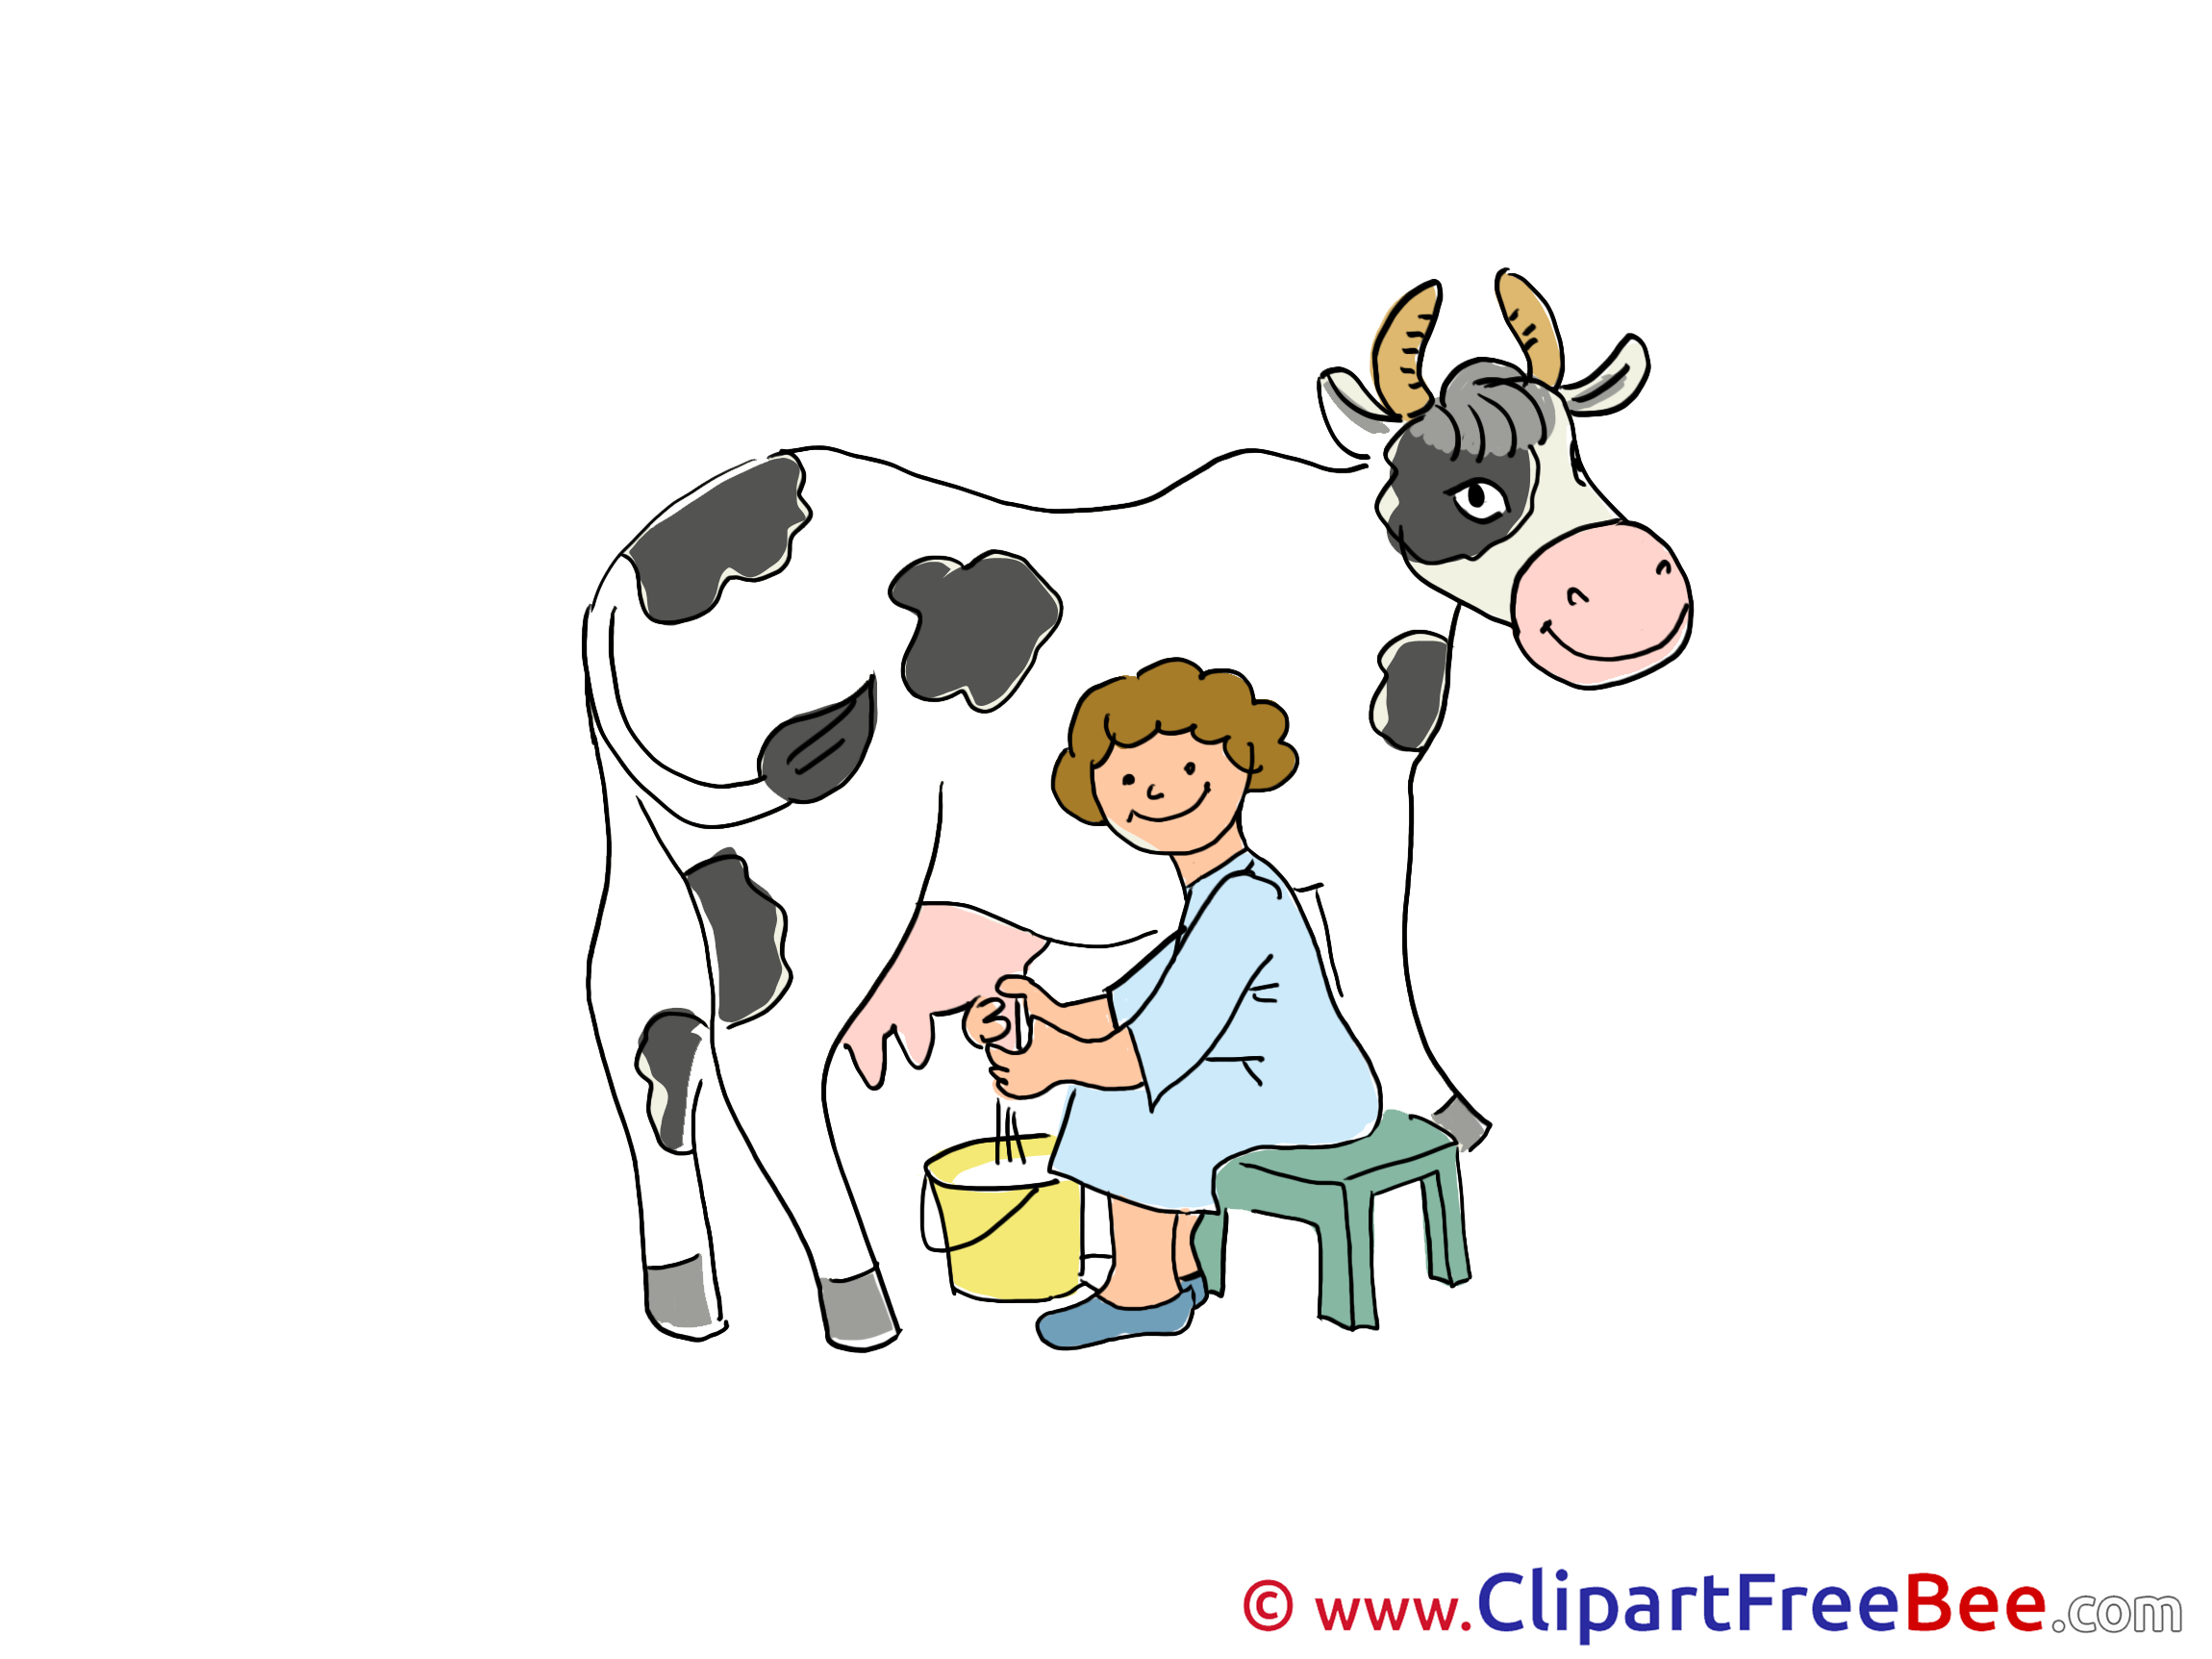 Milkmaid Cow Clipart free Illustrations